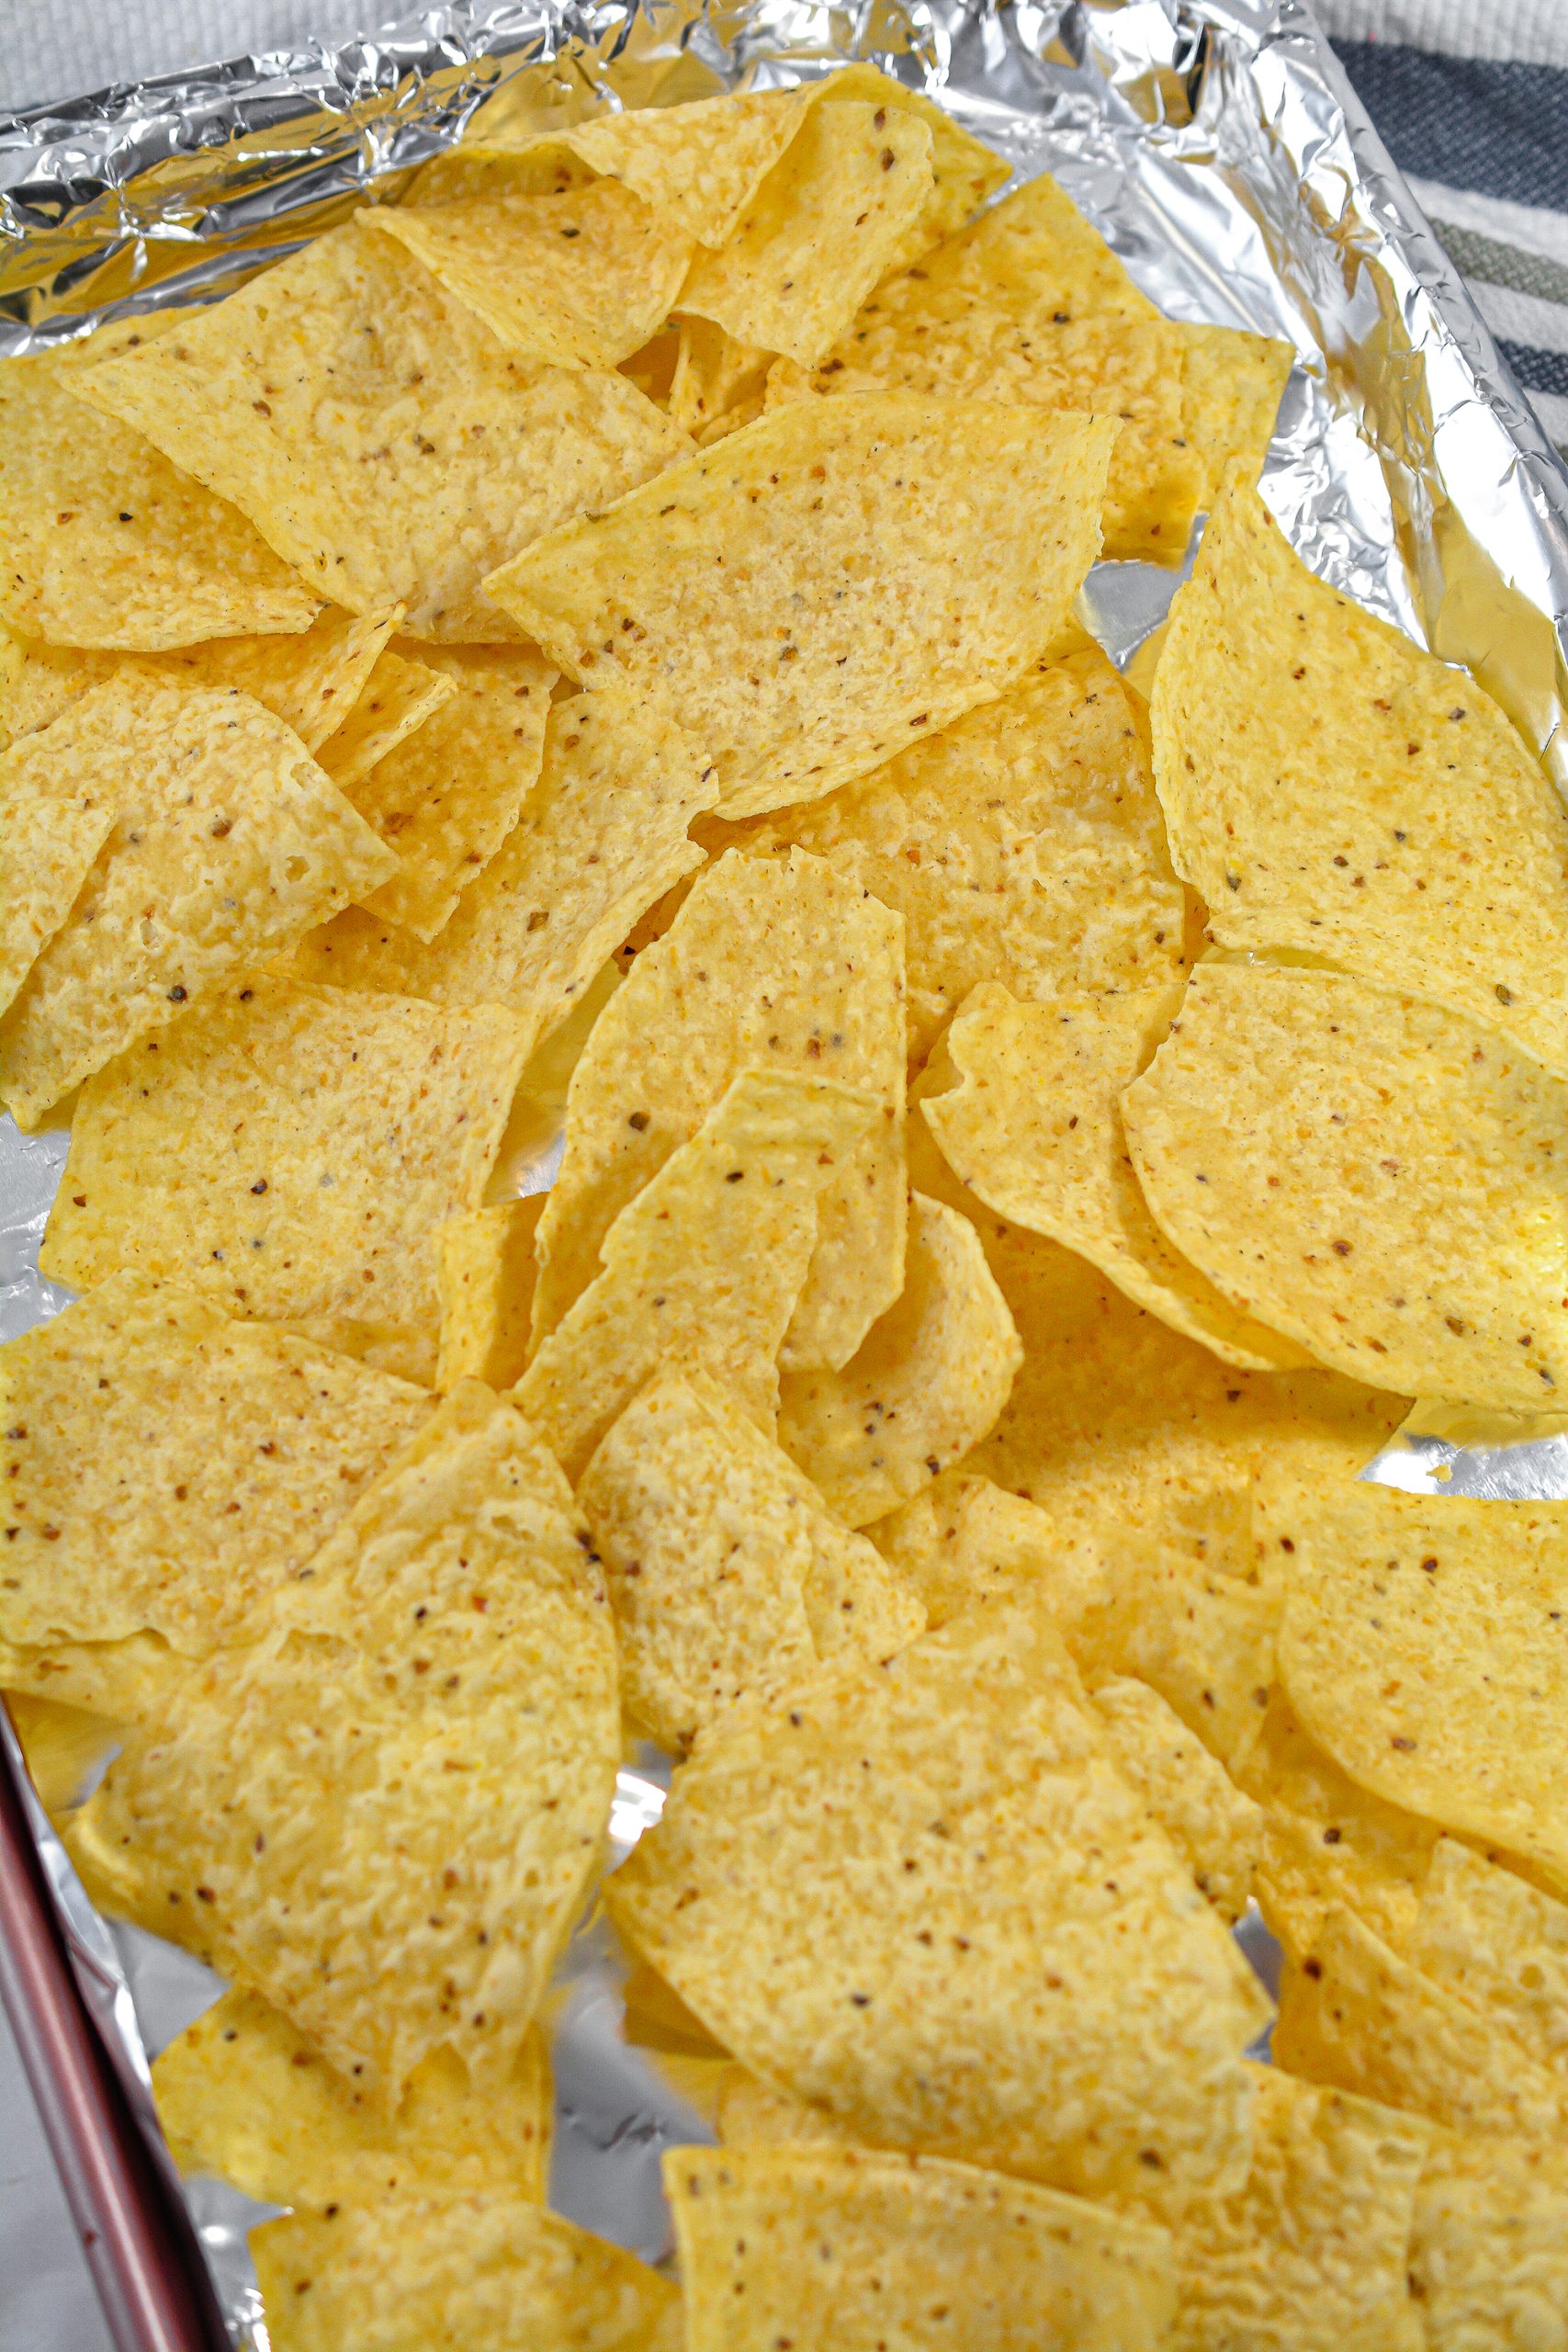 Spread a layer of chips on the baking sheet.